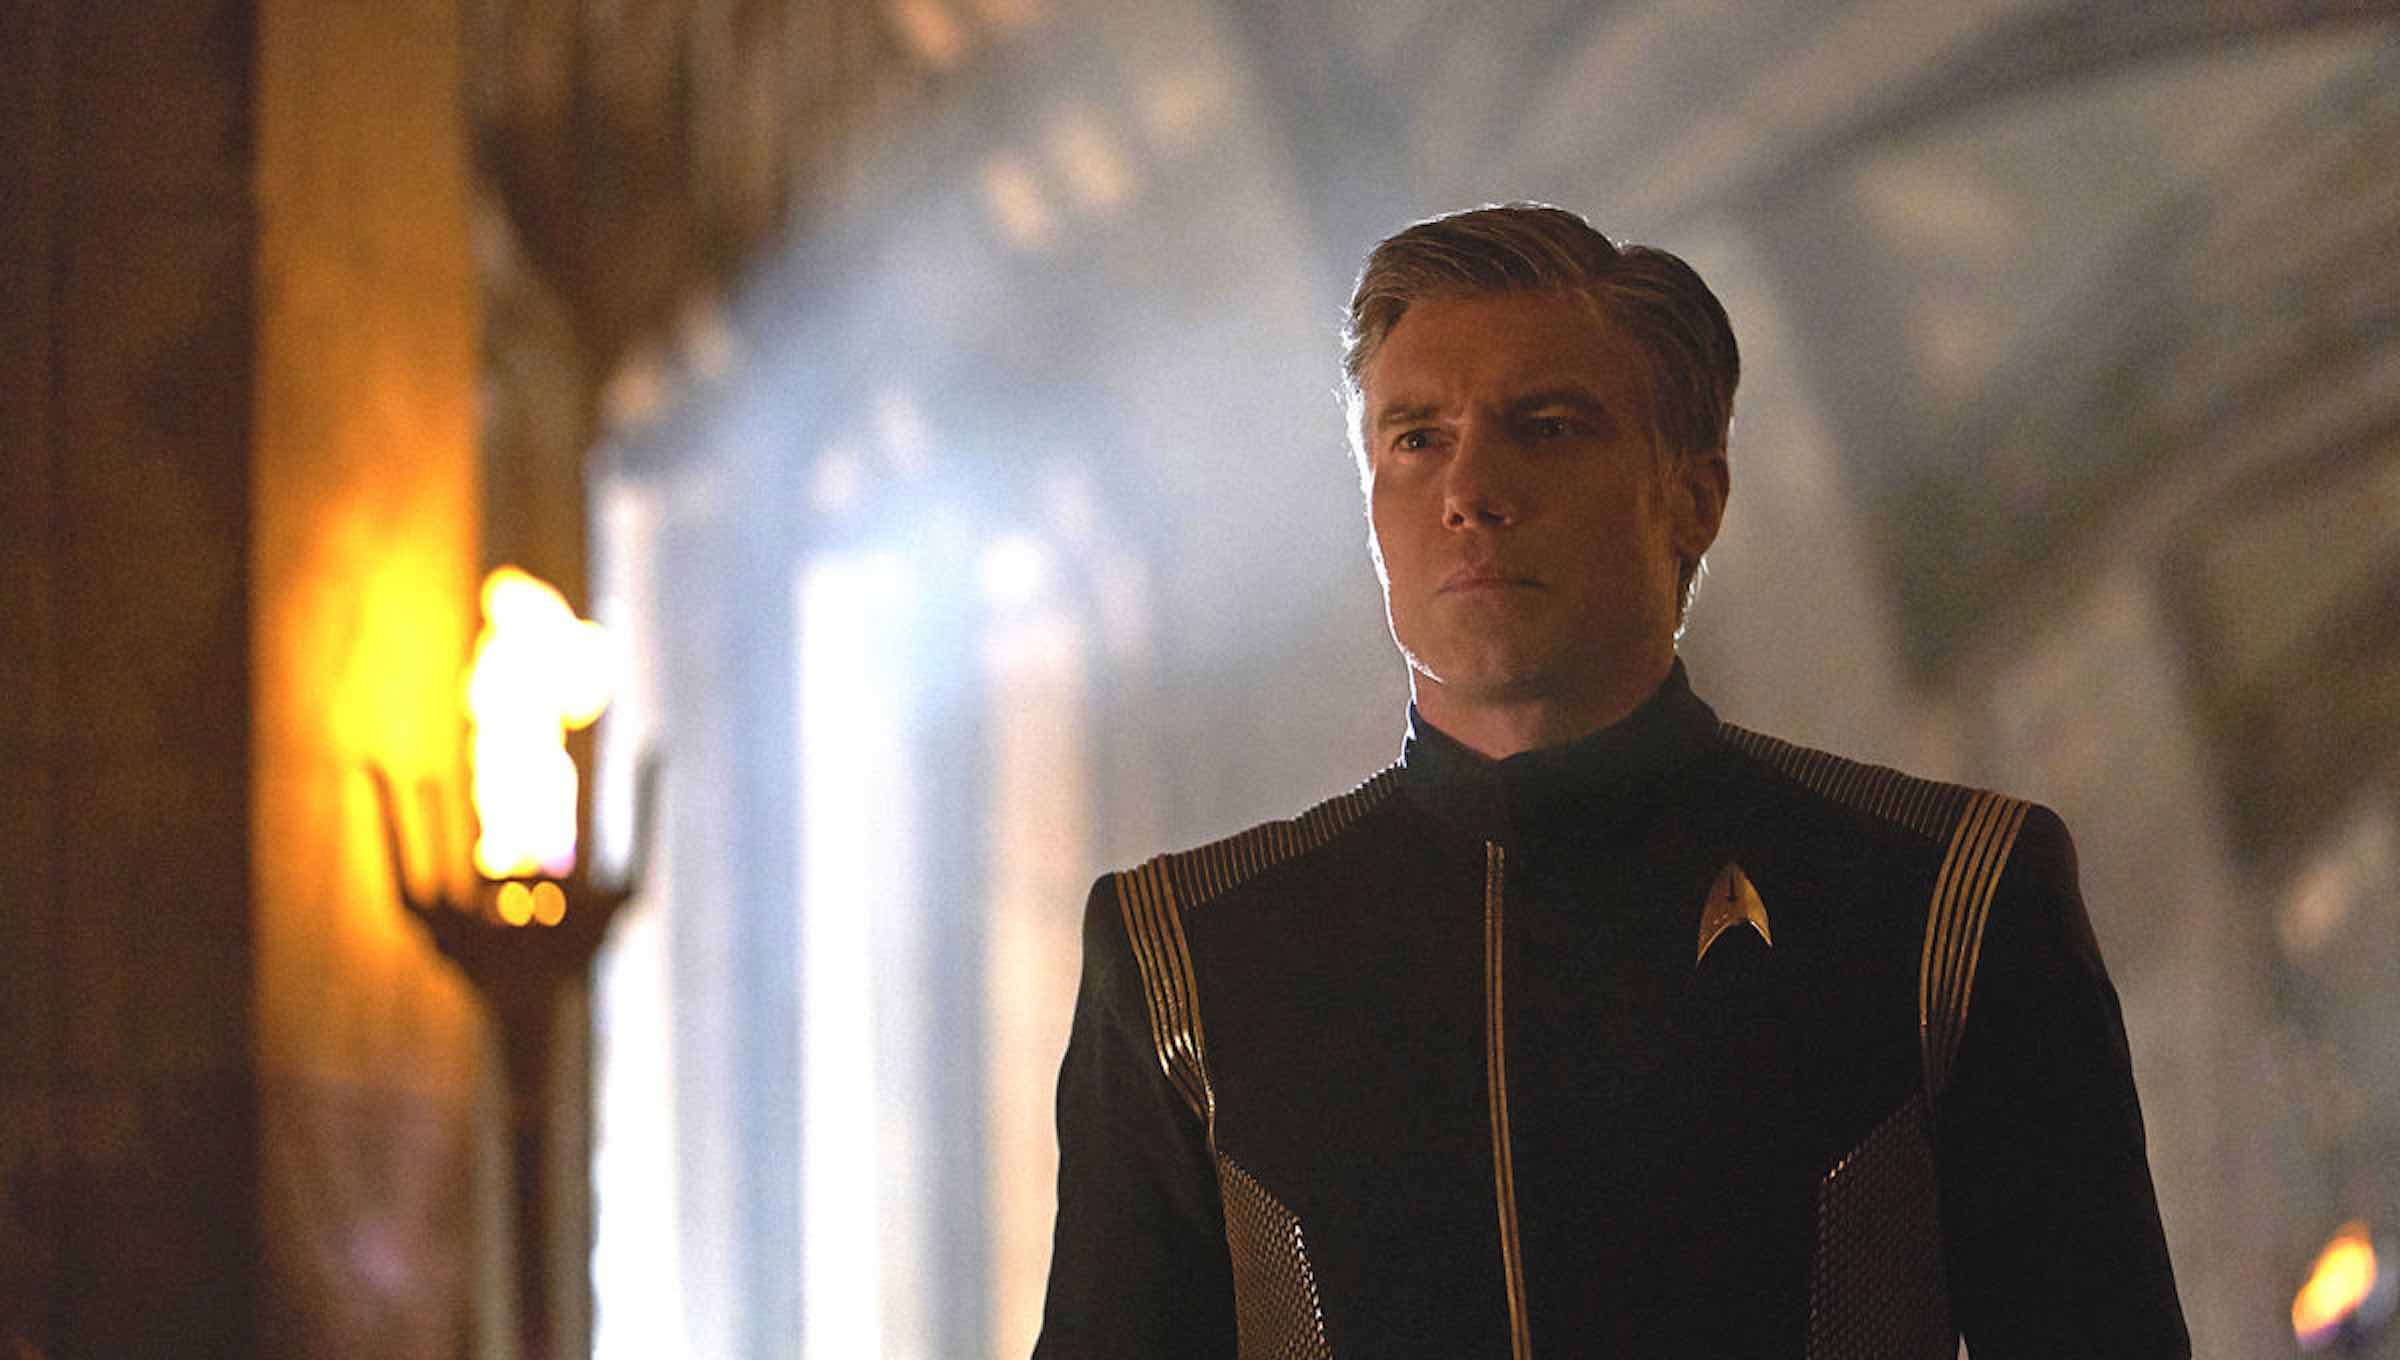 'Star Trek: Discovery' has been a changeup for the franchise as we head into season 3. Here's why a Captain Pike spinoff should happen.